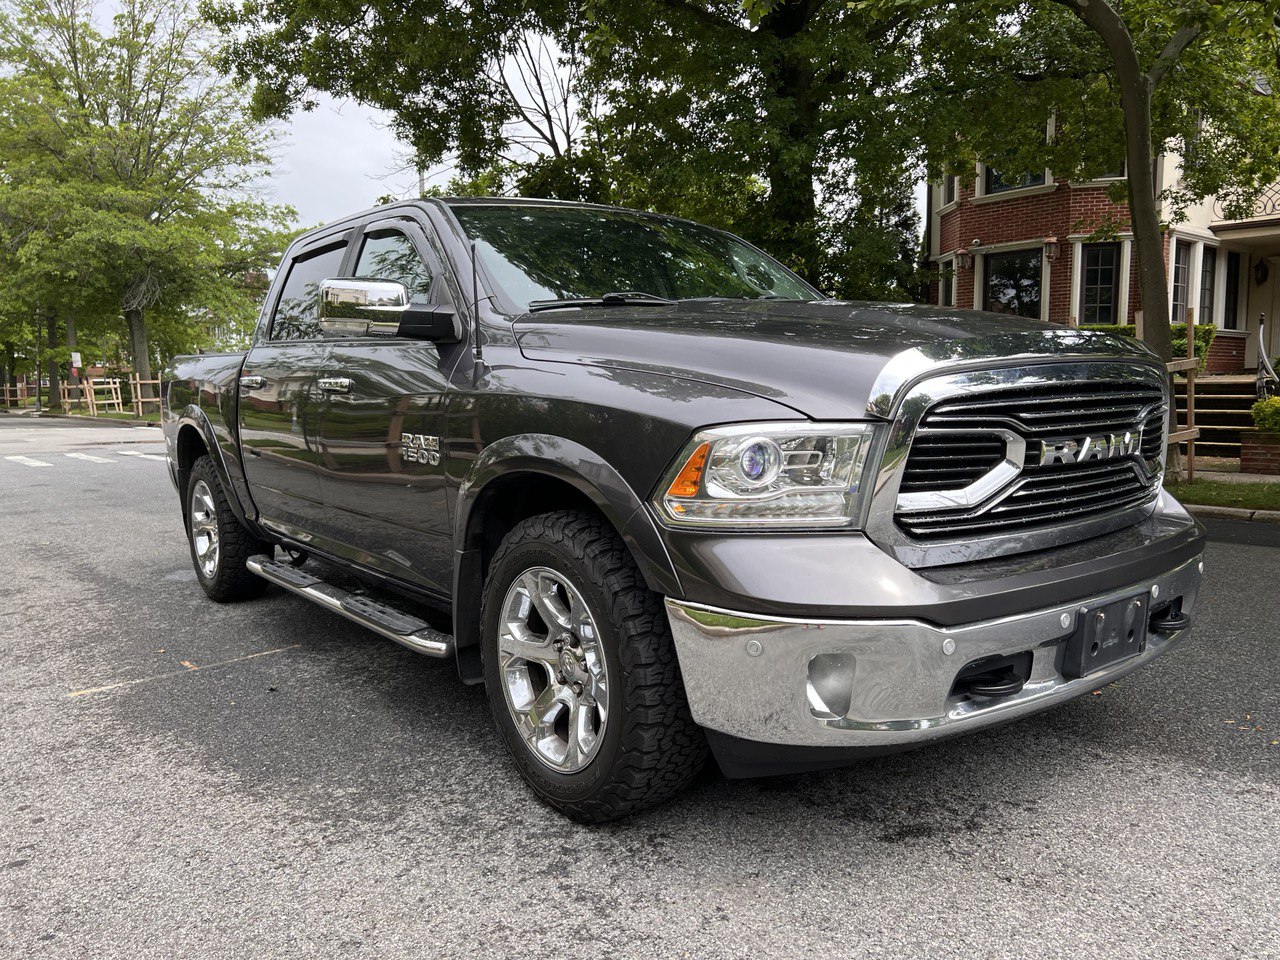 Used Car - 2016 RAM 1500 Laramie 4x4 4dr Crew Cab for Sale in Staten Island, NY